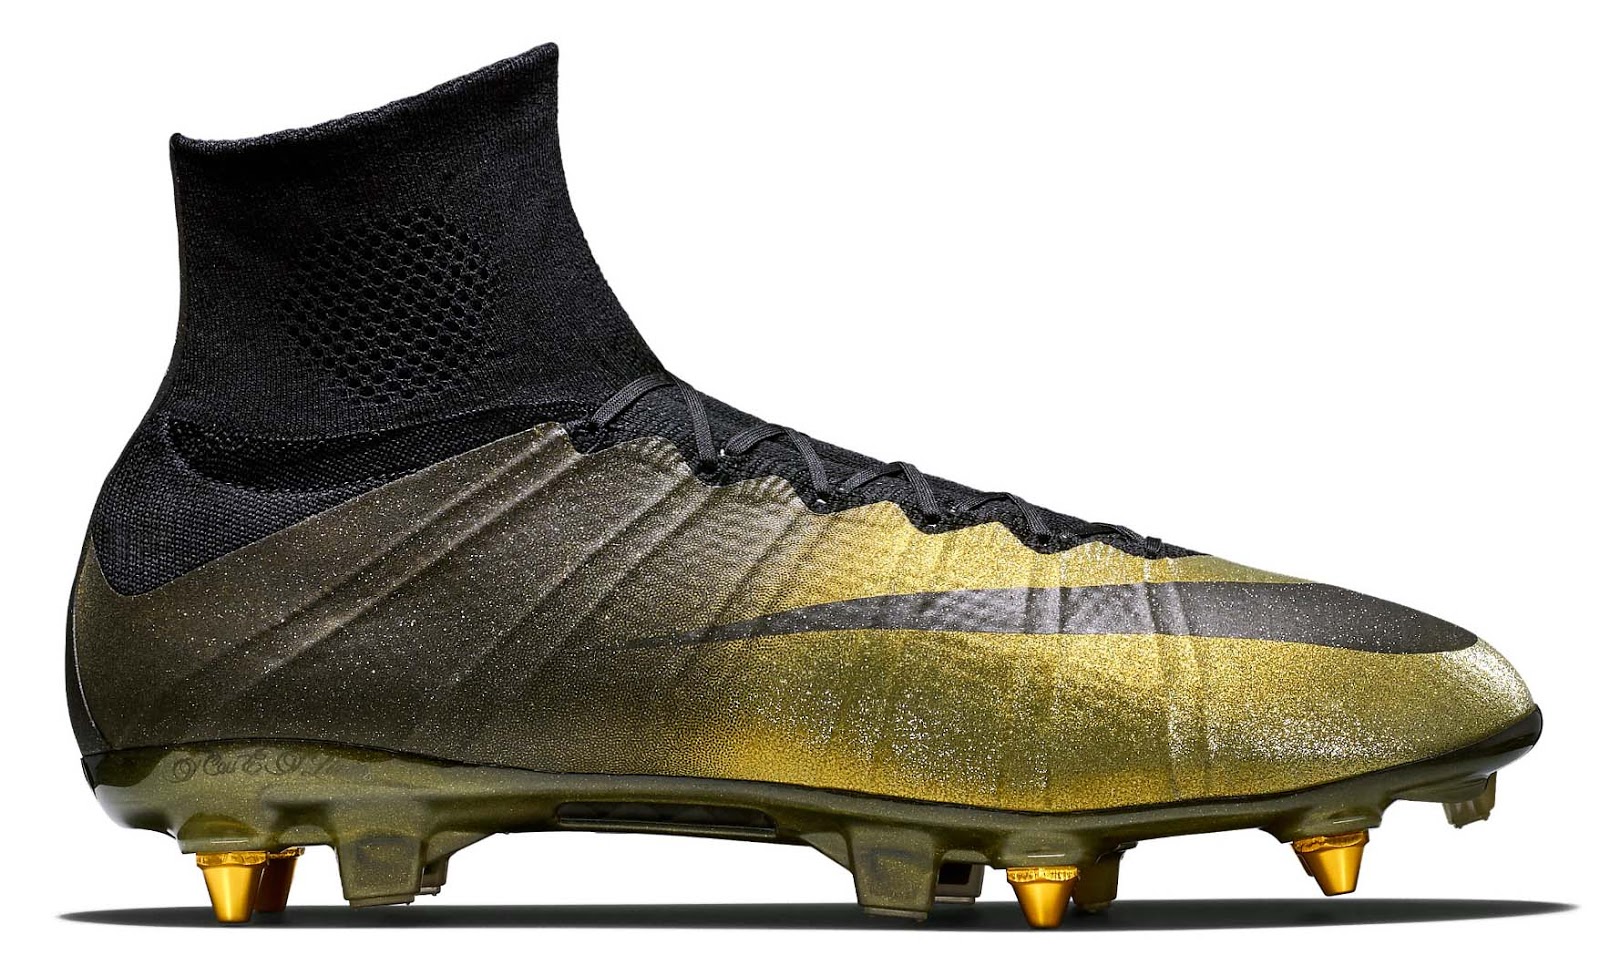 Circunferencia Jabón Trueno Nike Mercurial Superfly CR7 Rare Gold Boots - Sold Out - Footy Headlines